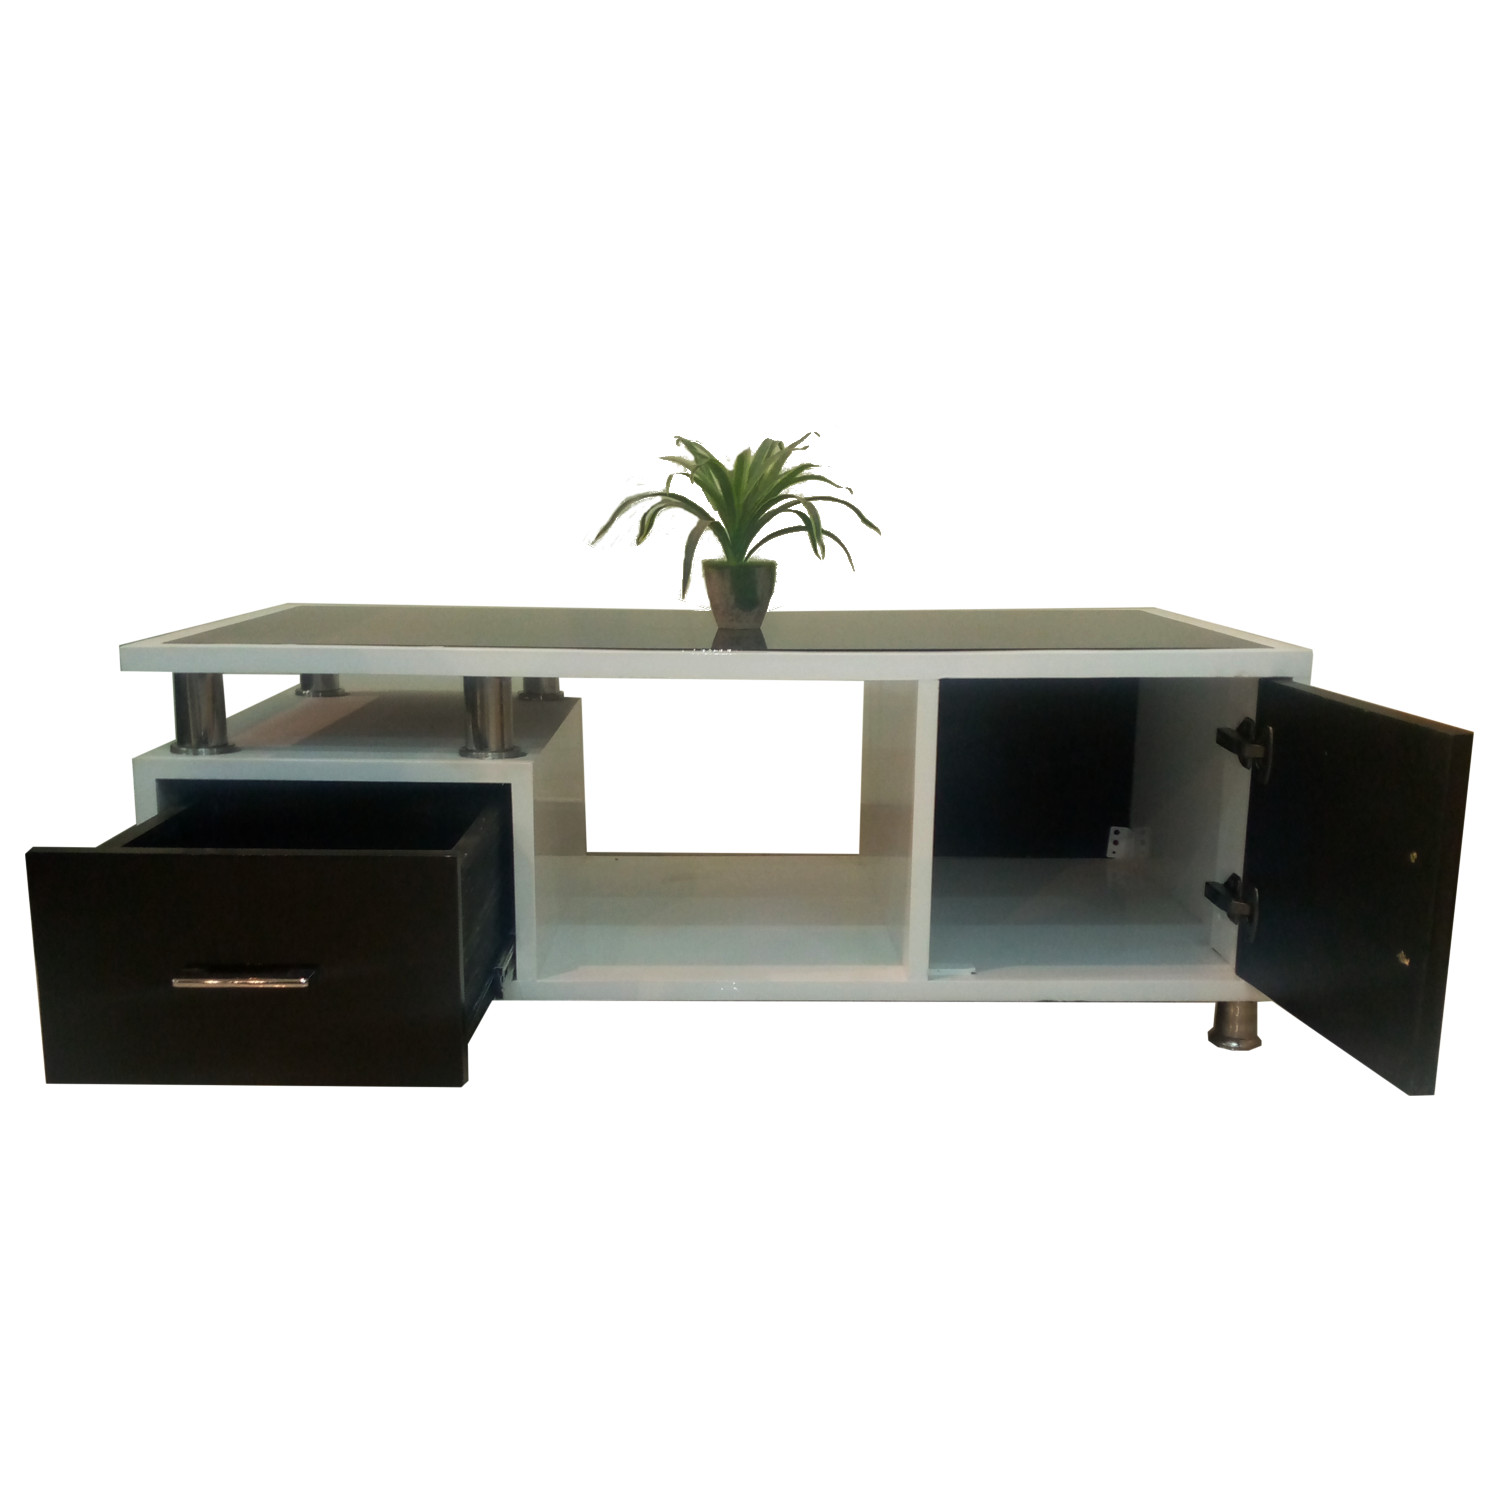 Amaltas Center Table with Drawer and Lacquered Glass Top